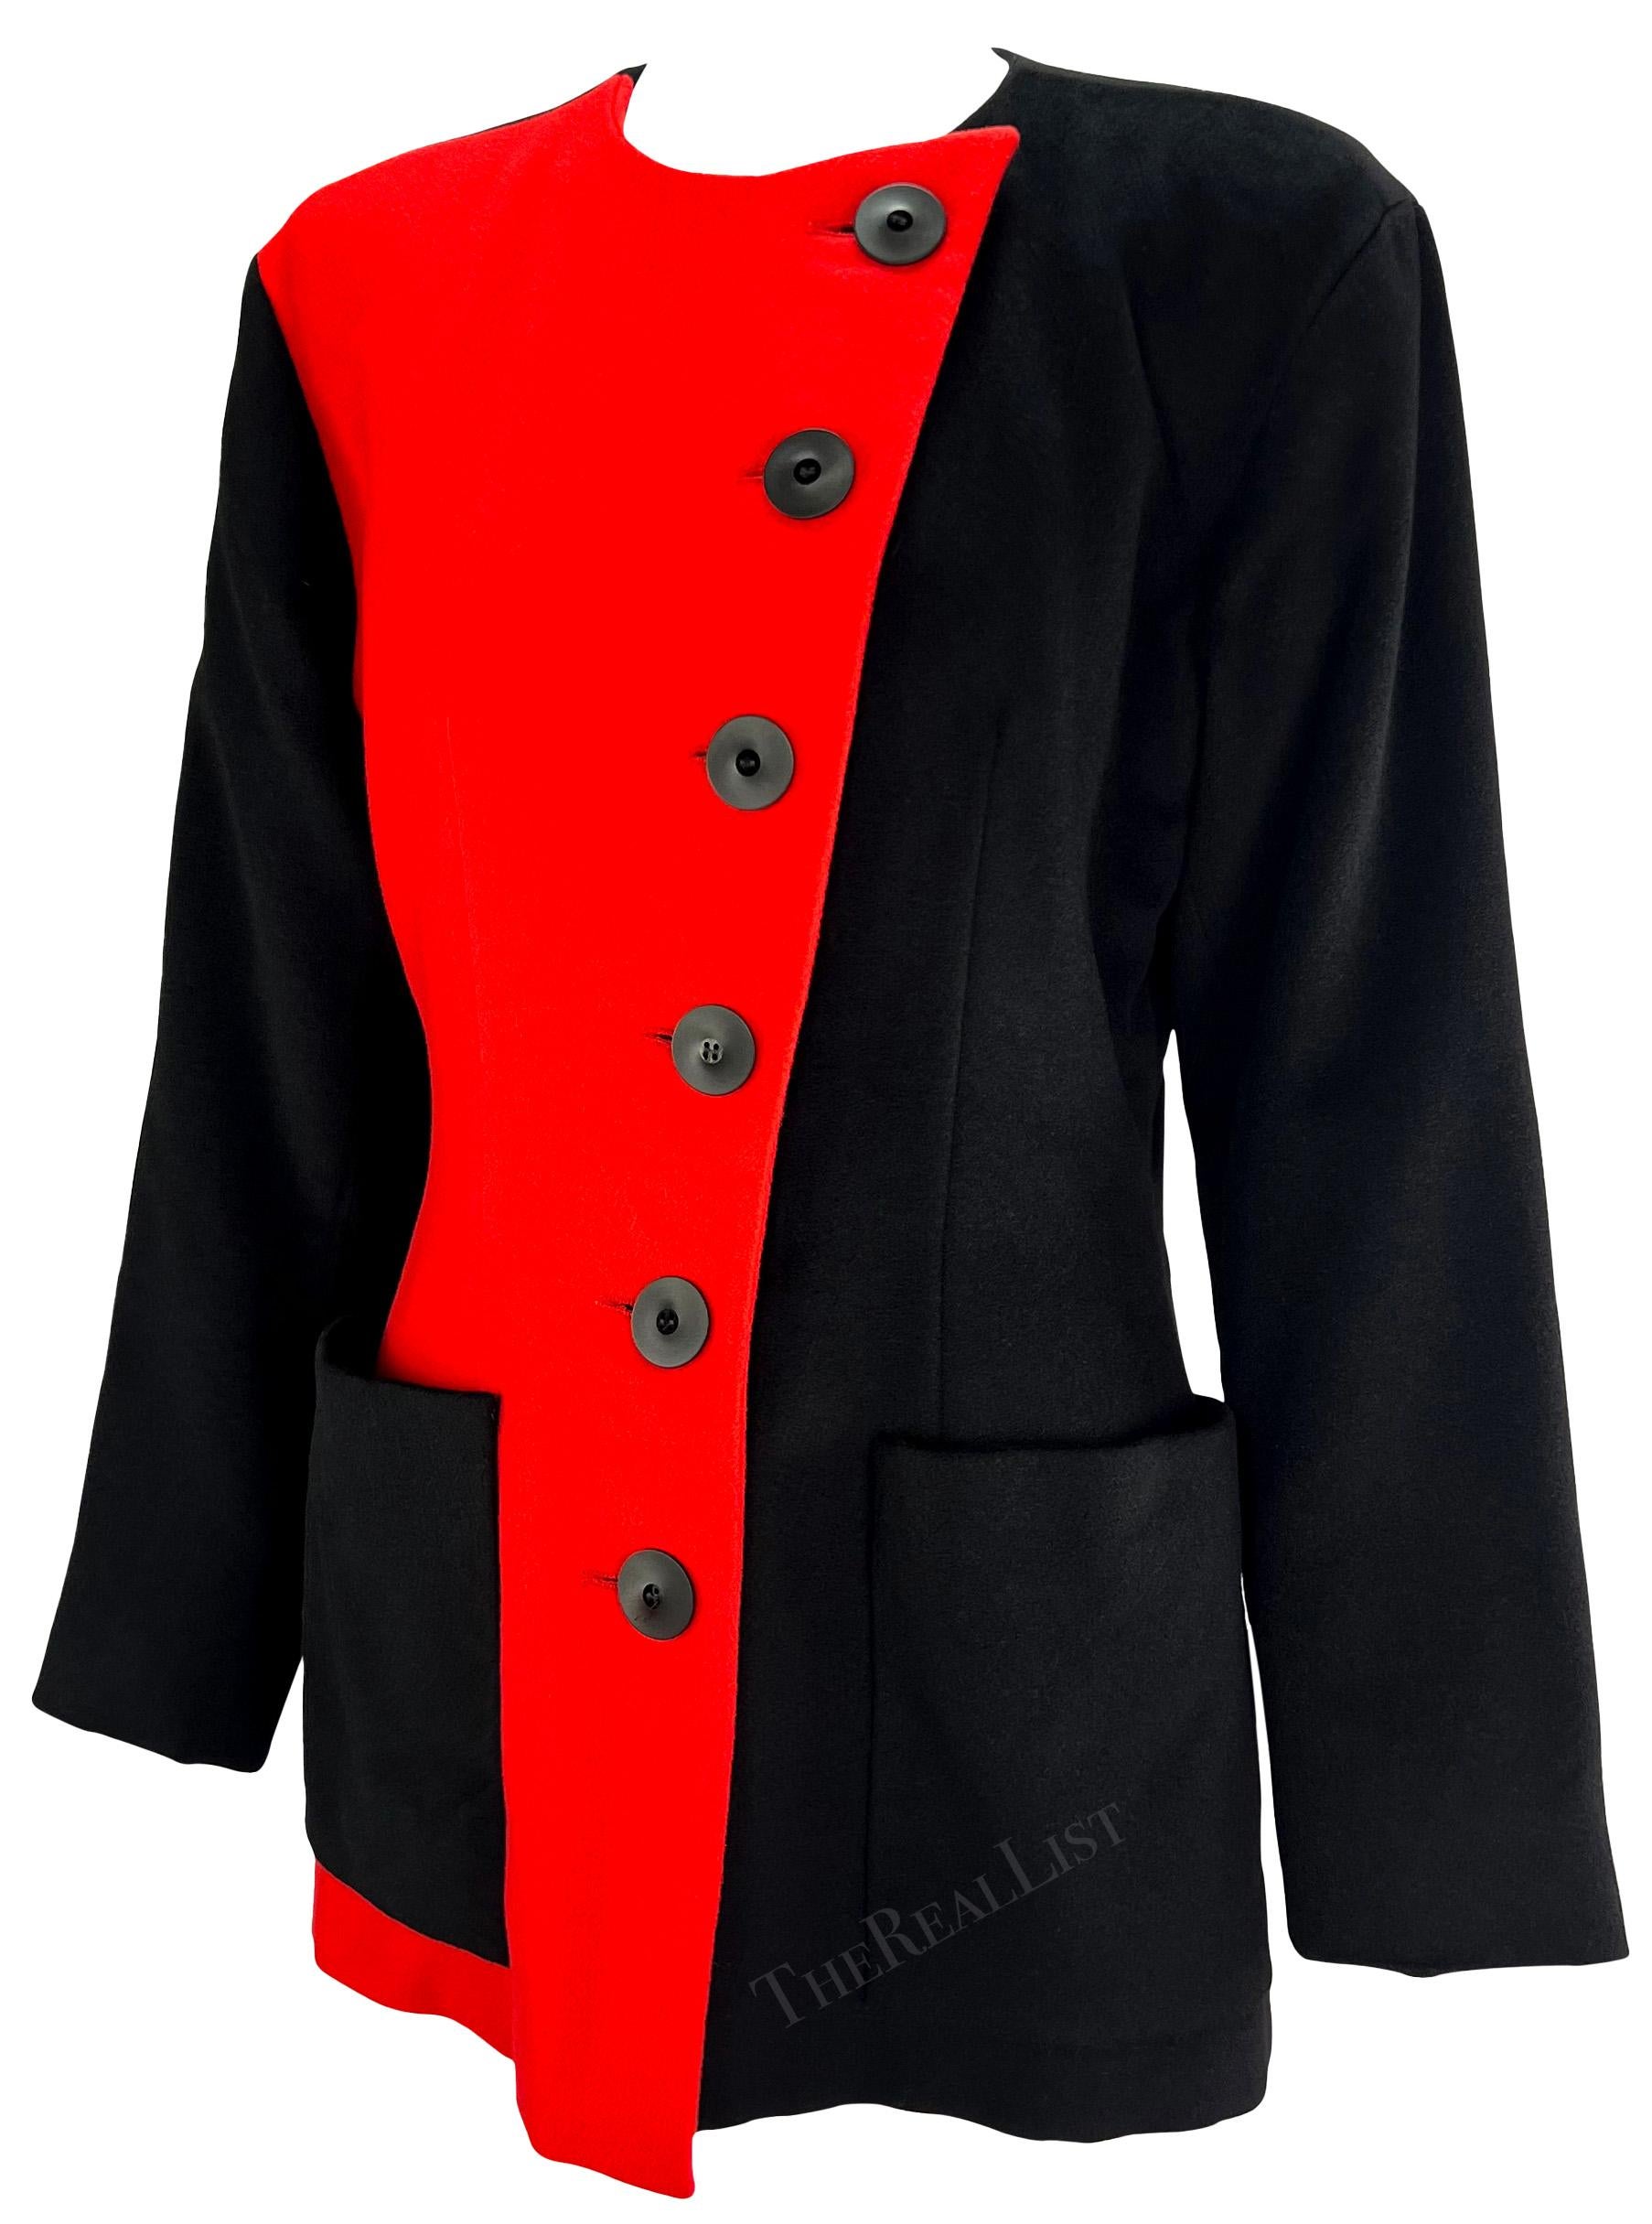 S/S 1992 Yves Saint Laurent Red Color-Block Black Mini Coat Dress Blazer Jacket In Excellent Condition For Sale In West Hollywood, CA